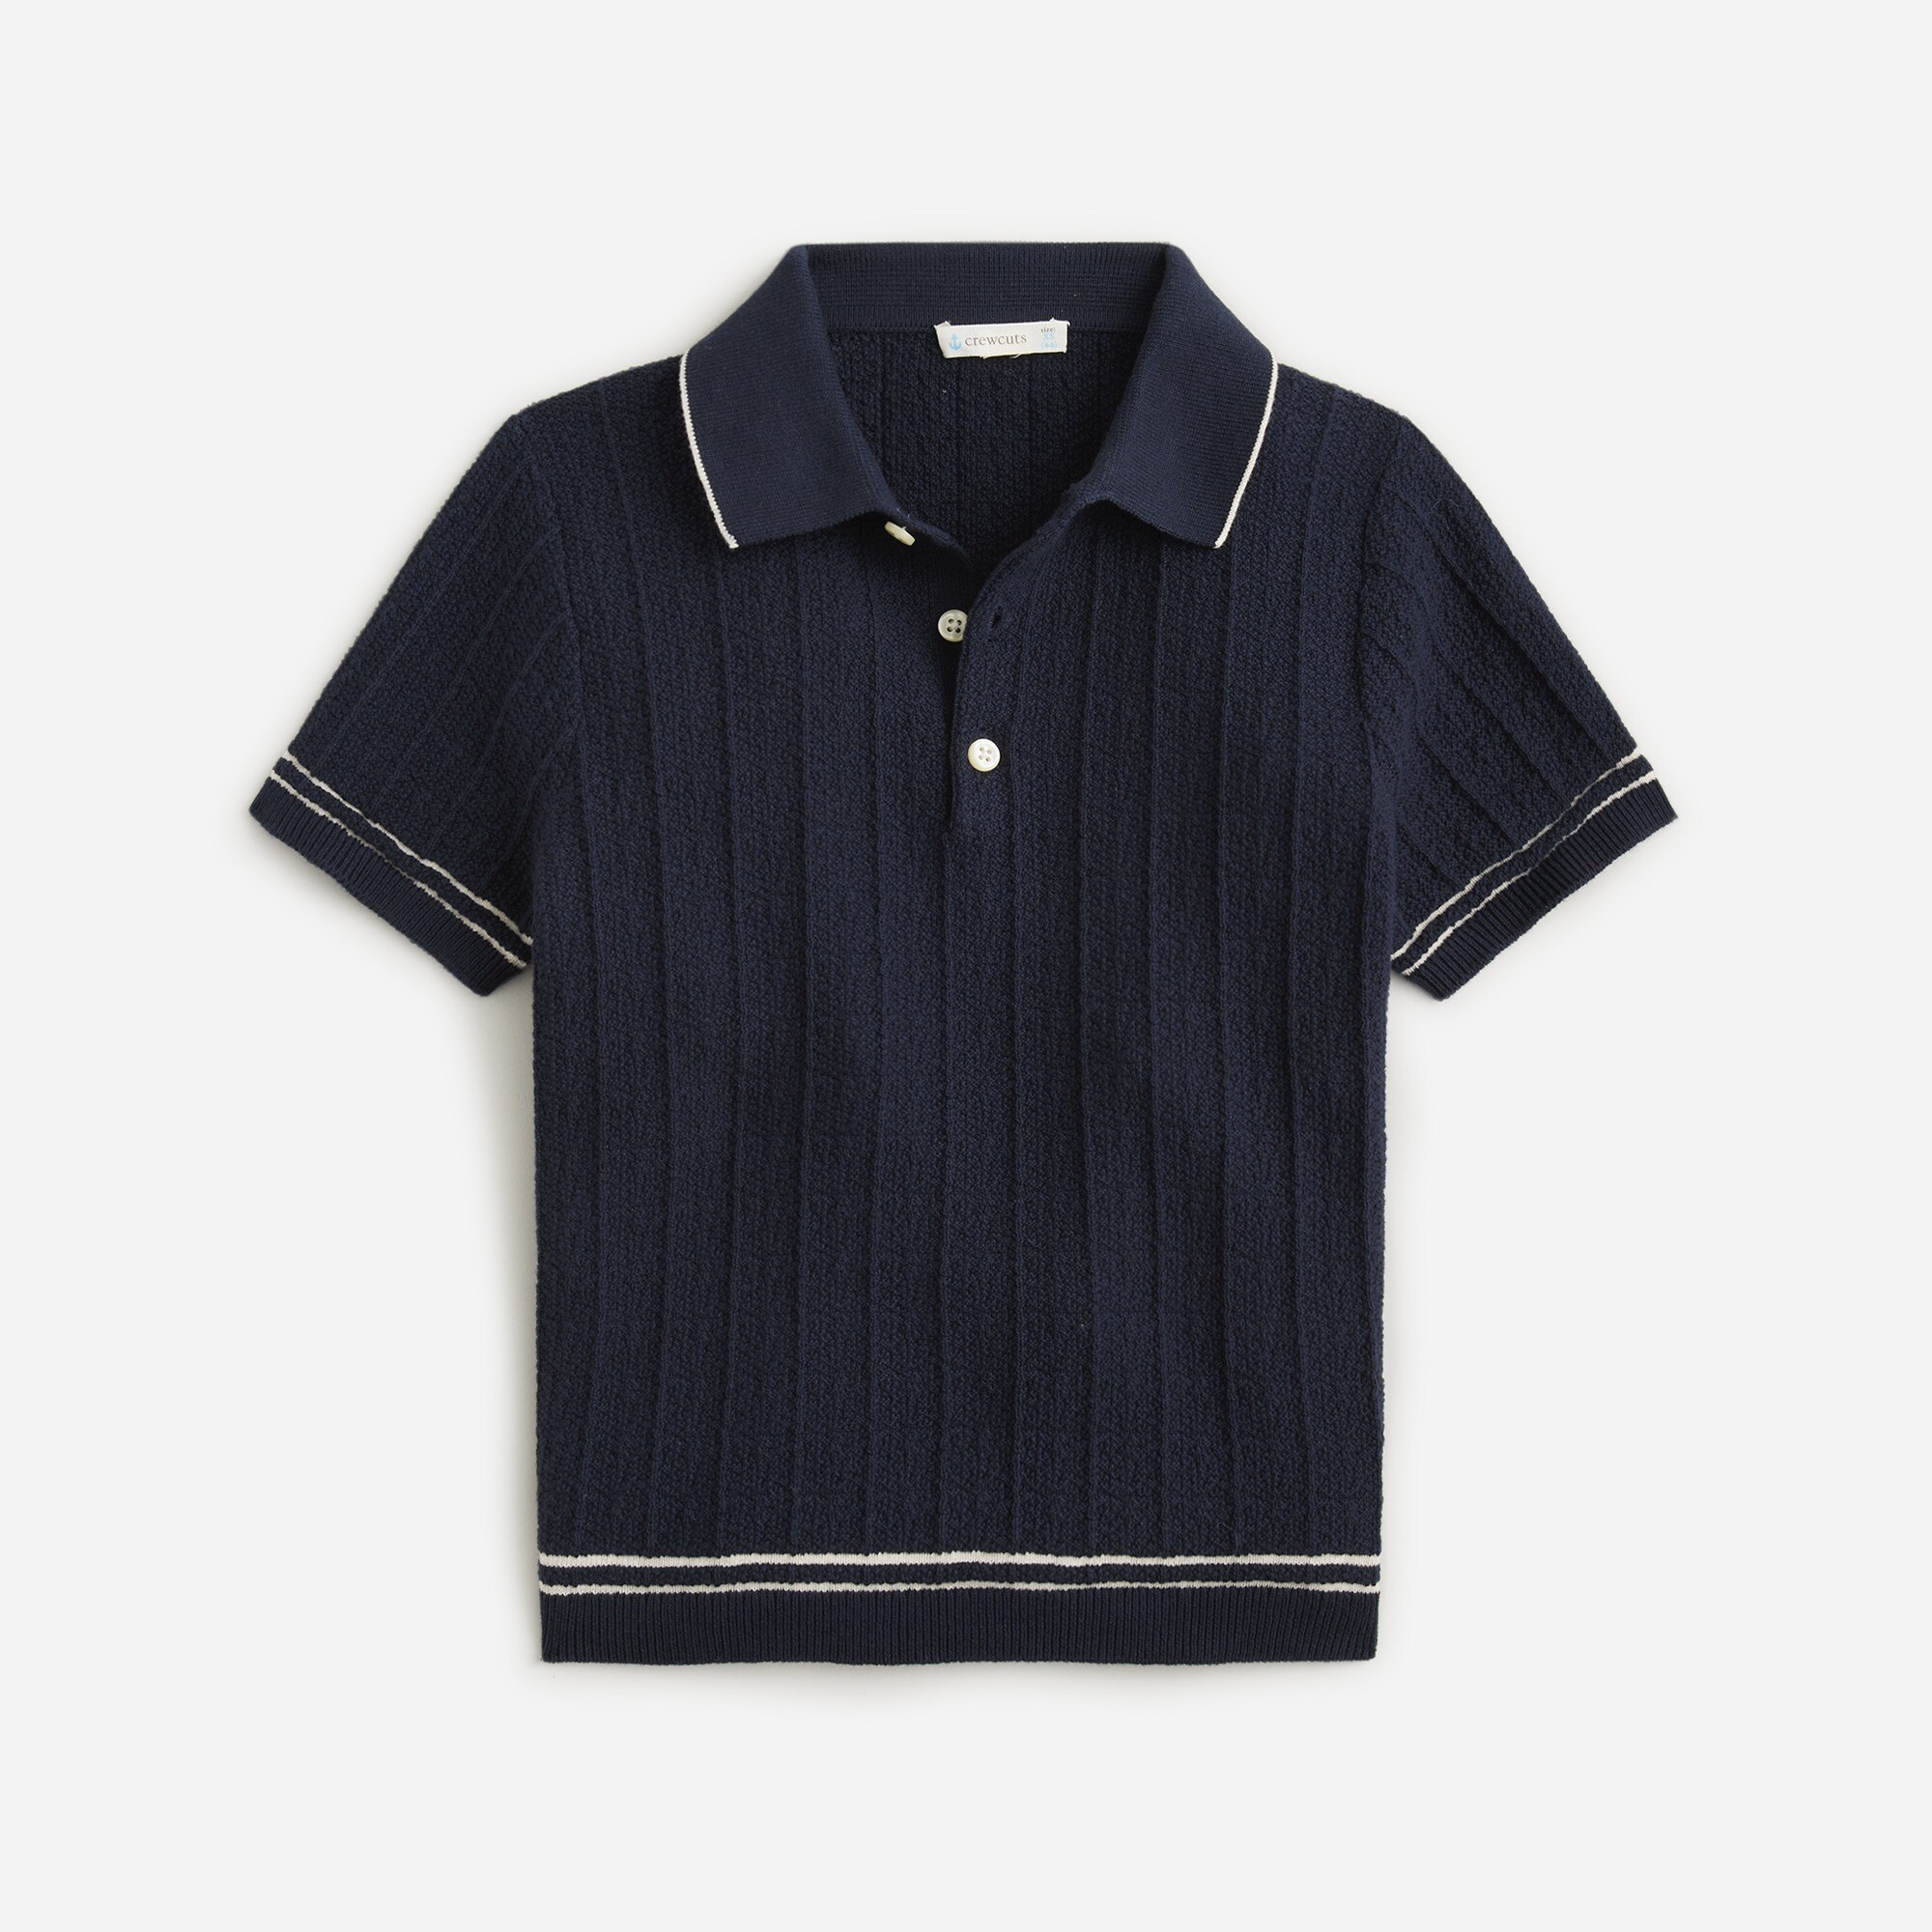  Boys' texture-stitch cotton-tipped sweater polo